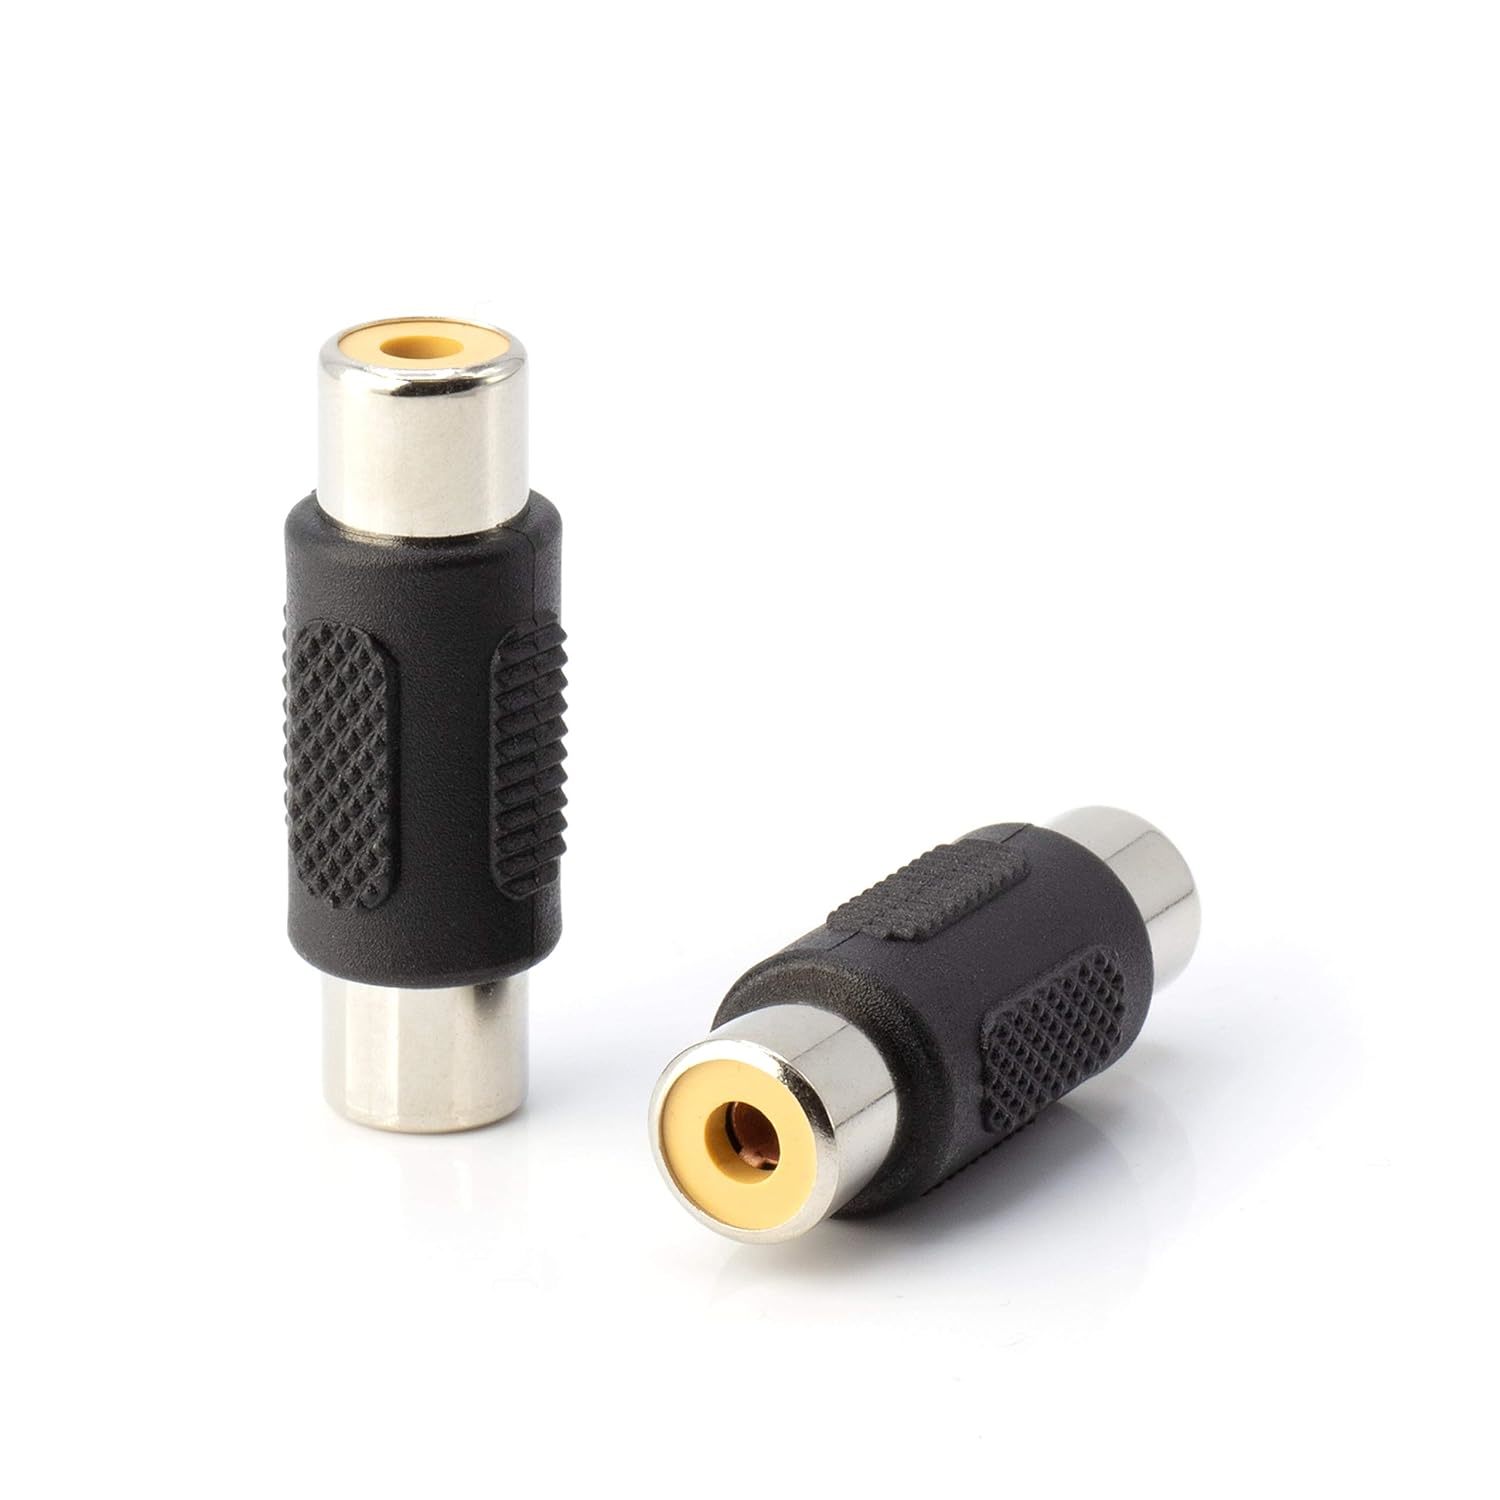 Primary image for THE CIMPLE CO RCA Adapter, Female to Female Coupler, Extender, Barrel - Audio Vi